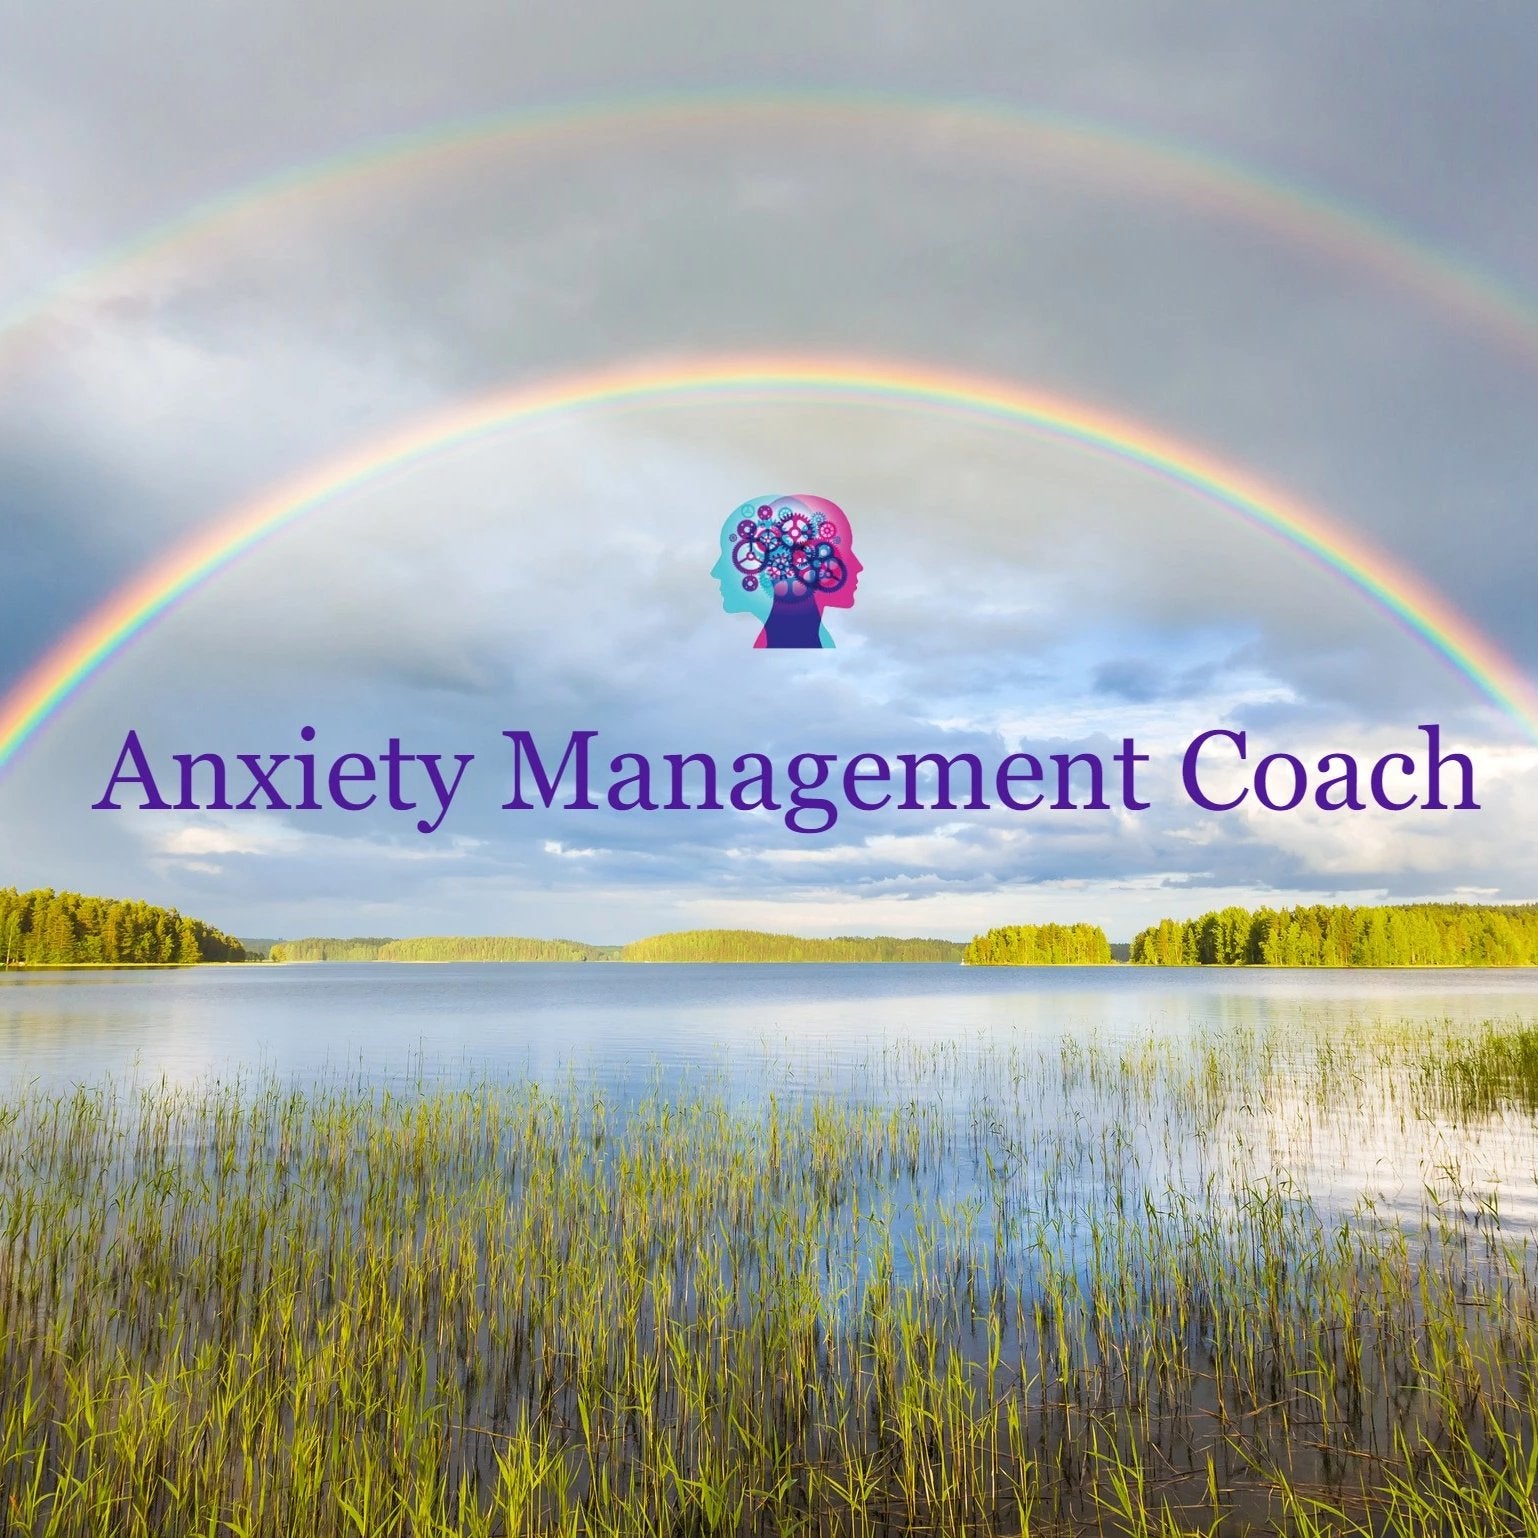 Anxiety Management Coach, Walk and Talk Therapy, Anxiety Help